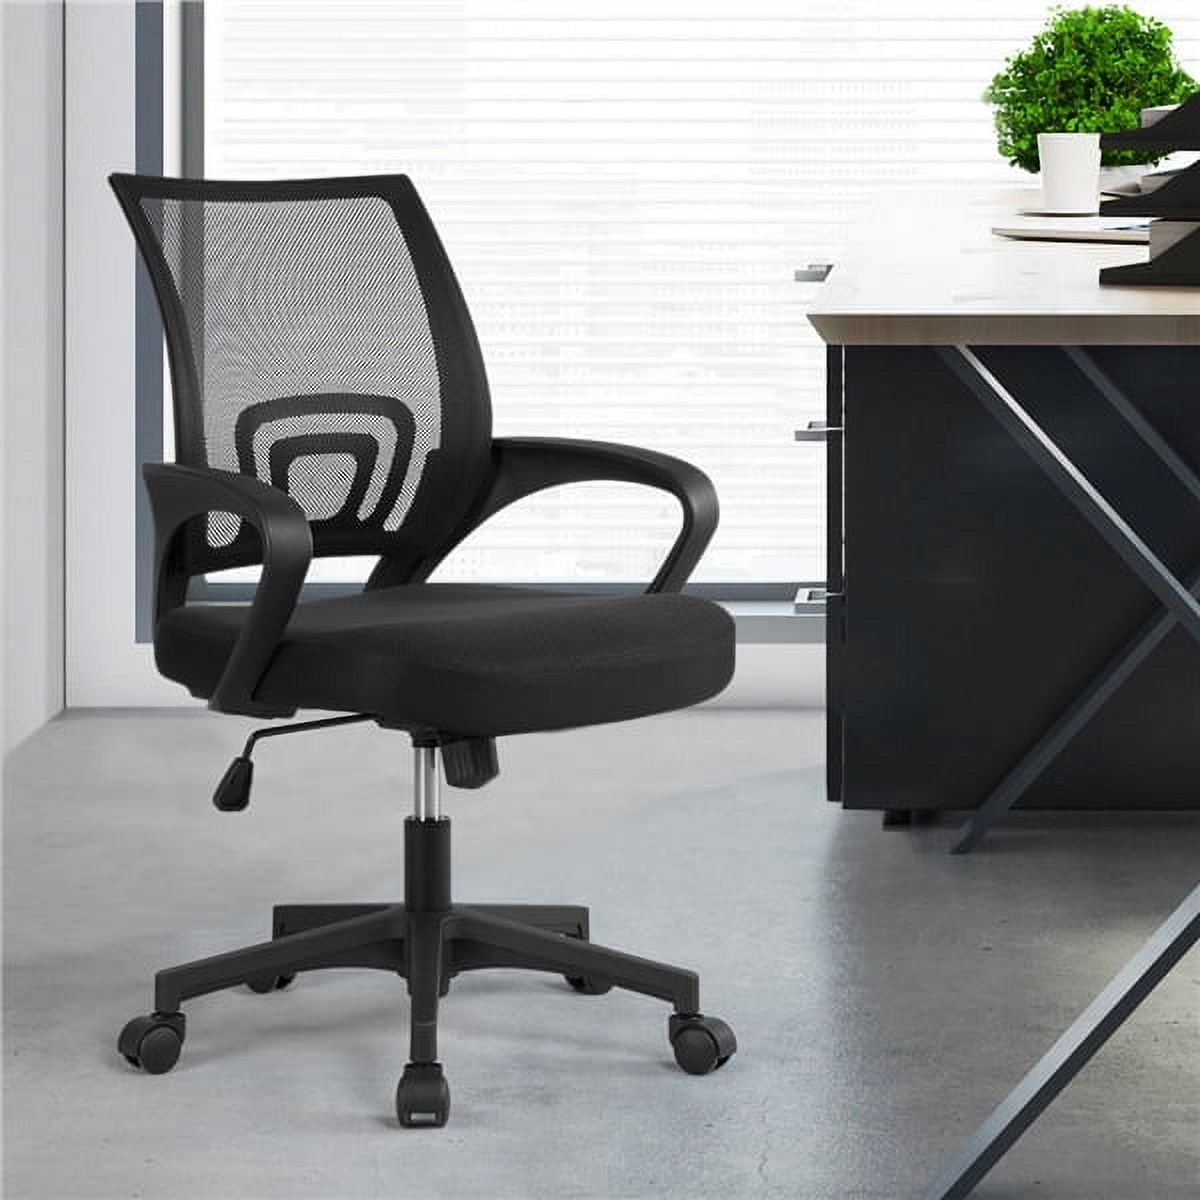 Topeakmart Manager's Chair with Lumbar Support & Reclining, 276 lb. Capacity, Black - image 4 of 18